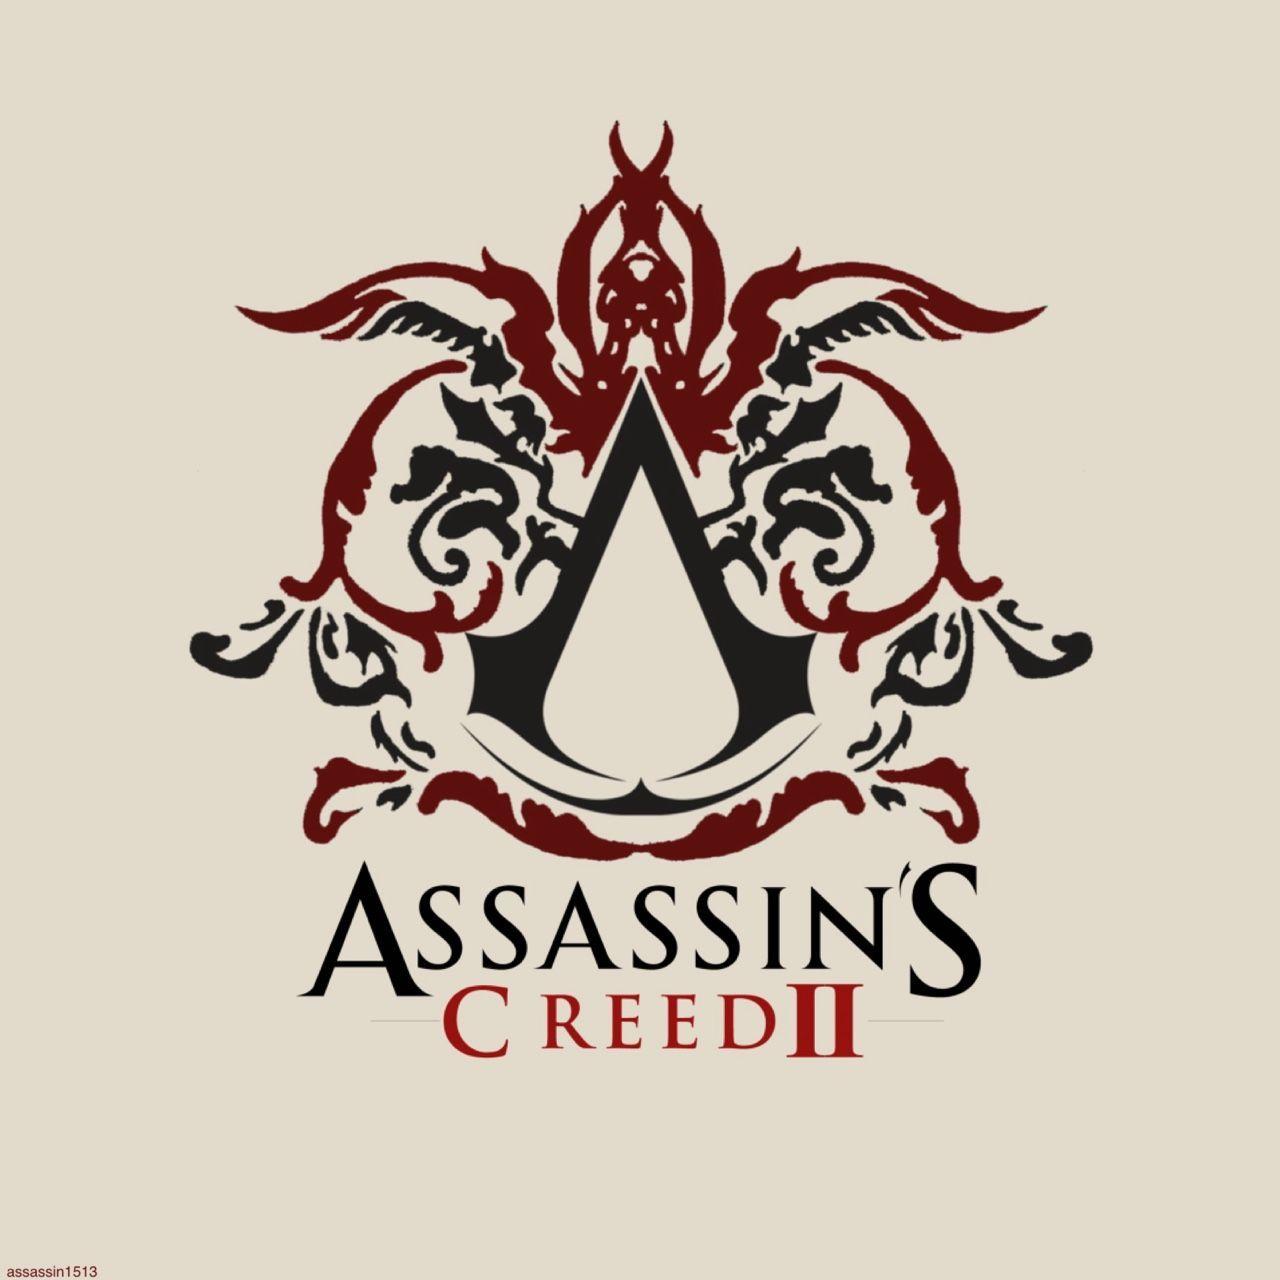 AC2 Logo - I love the assassin symbol on this one | Assassin's Creed ...